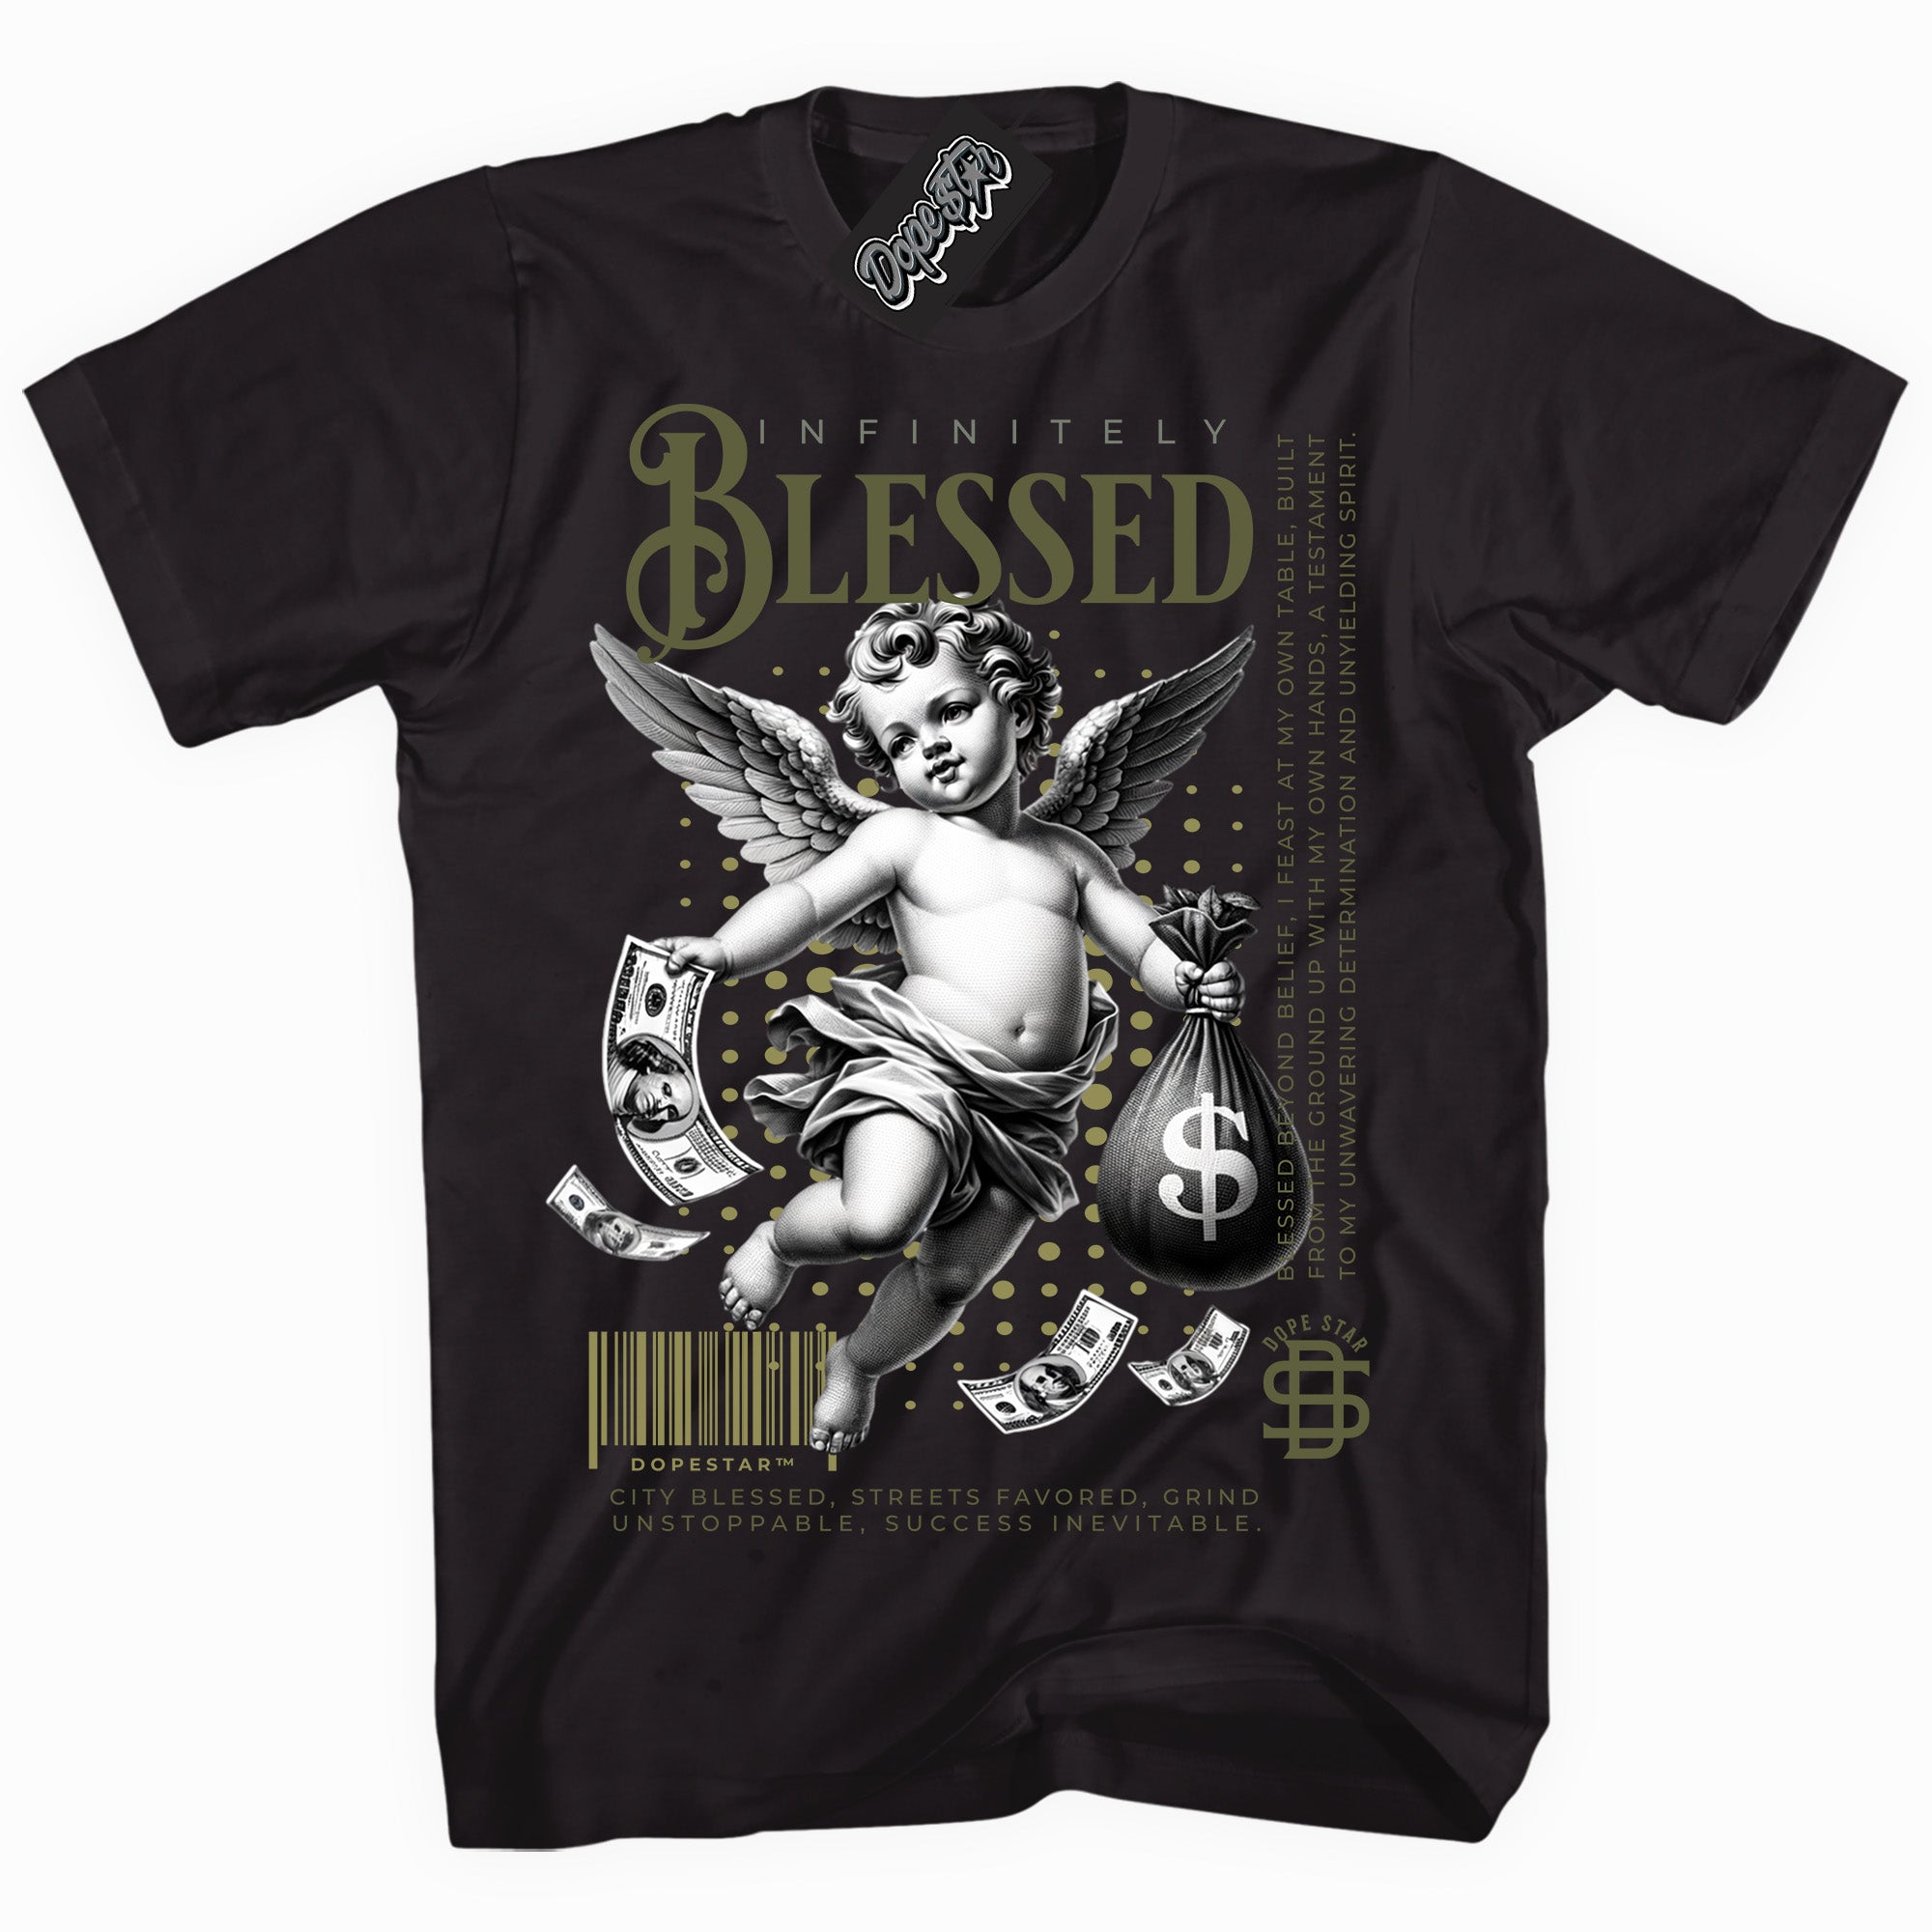 Cool Black graphic tee with “ Infinitely Blessed ” print, that perfectly matches Craft Olive 4s sneakers 